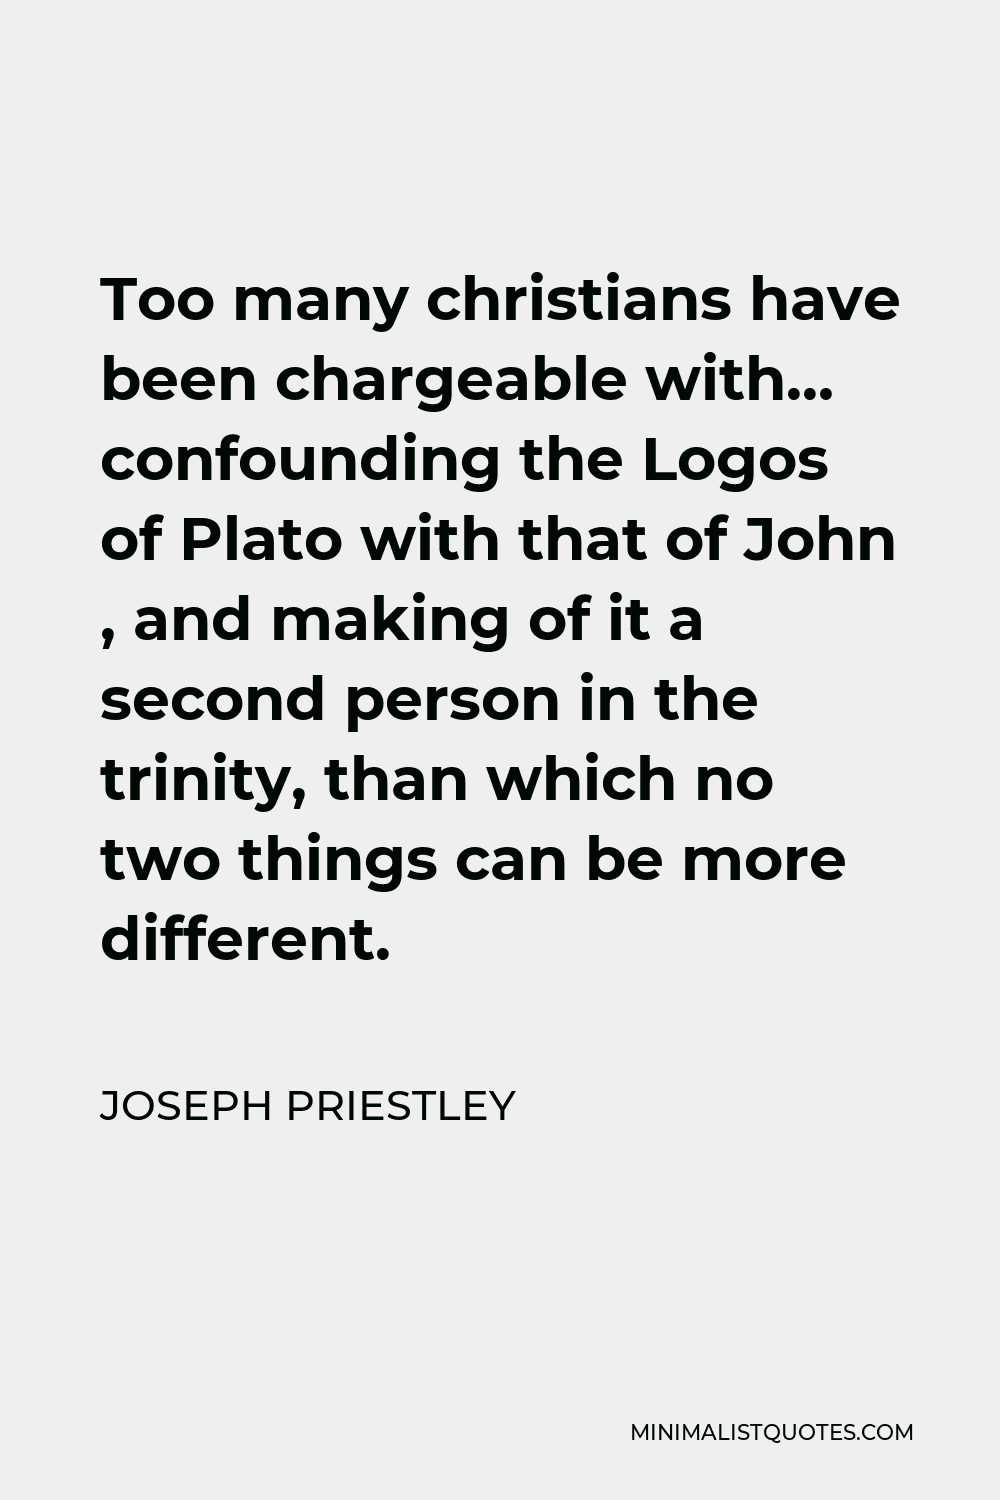 Joseph Priestley Quote - Too many christians have been chargeable with… confounding the Logos of Plato with that of John , and making of it a second person in the trinity, than which no two things can be more different.